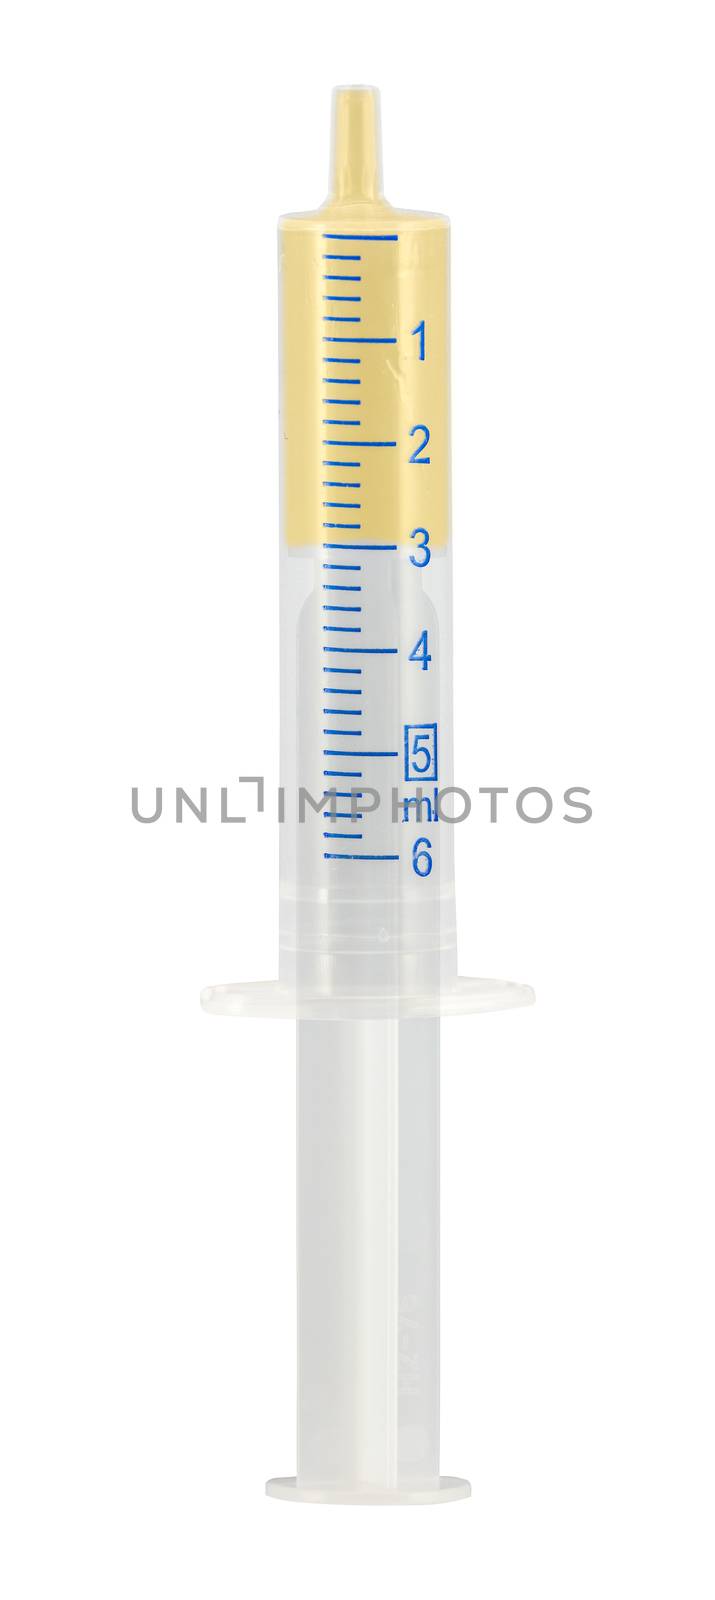 Isolated Syringe Full Of Medicine Or Vaccine On A White Background